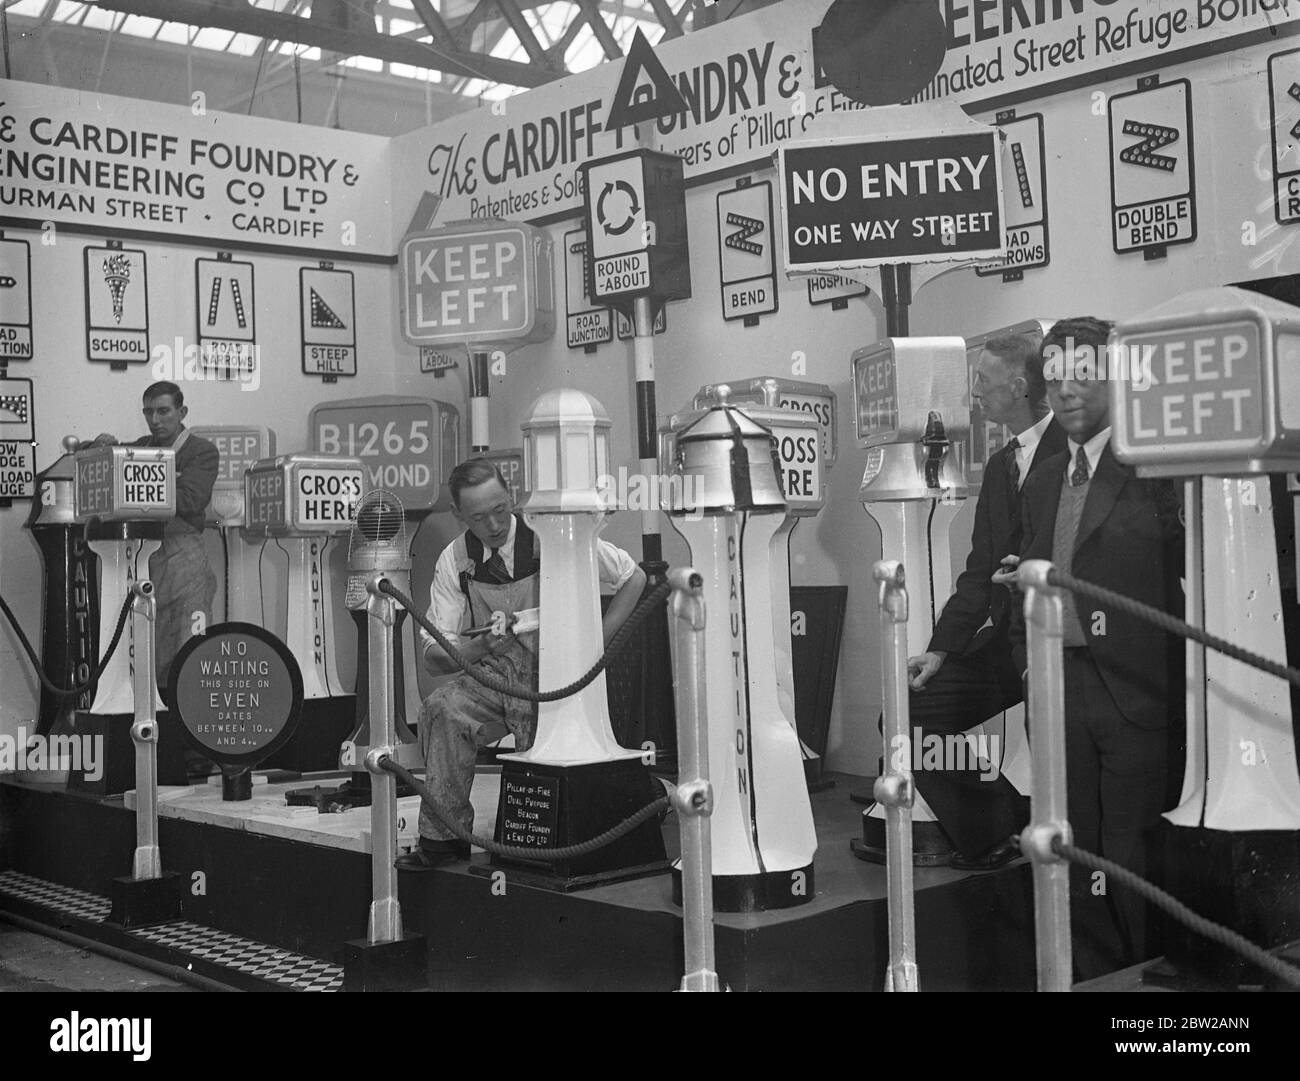 'Dizzy' time for motorist at public works exhibition. The Public Works and transport exhibition has opened at the Royal agricultural Hall, Islington. The exhibits include the latest traffic signs, pneumatic drills and road engineering machinery. 15 November 1937 Stock Photo